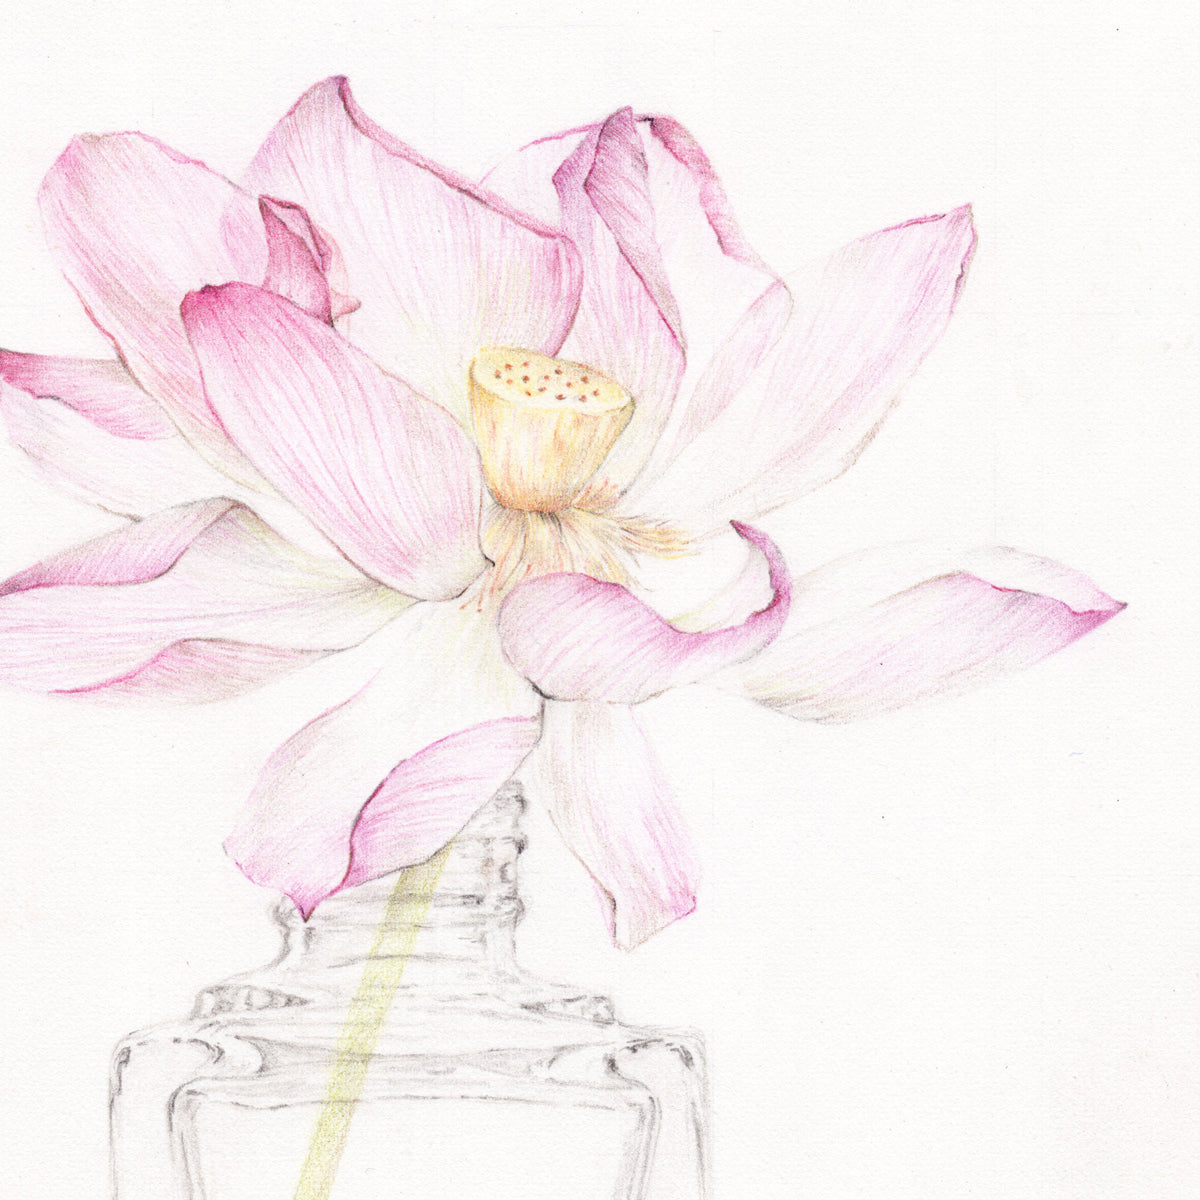 How To Draw A Lotus Flower - Art For Kids Hub -